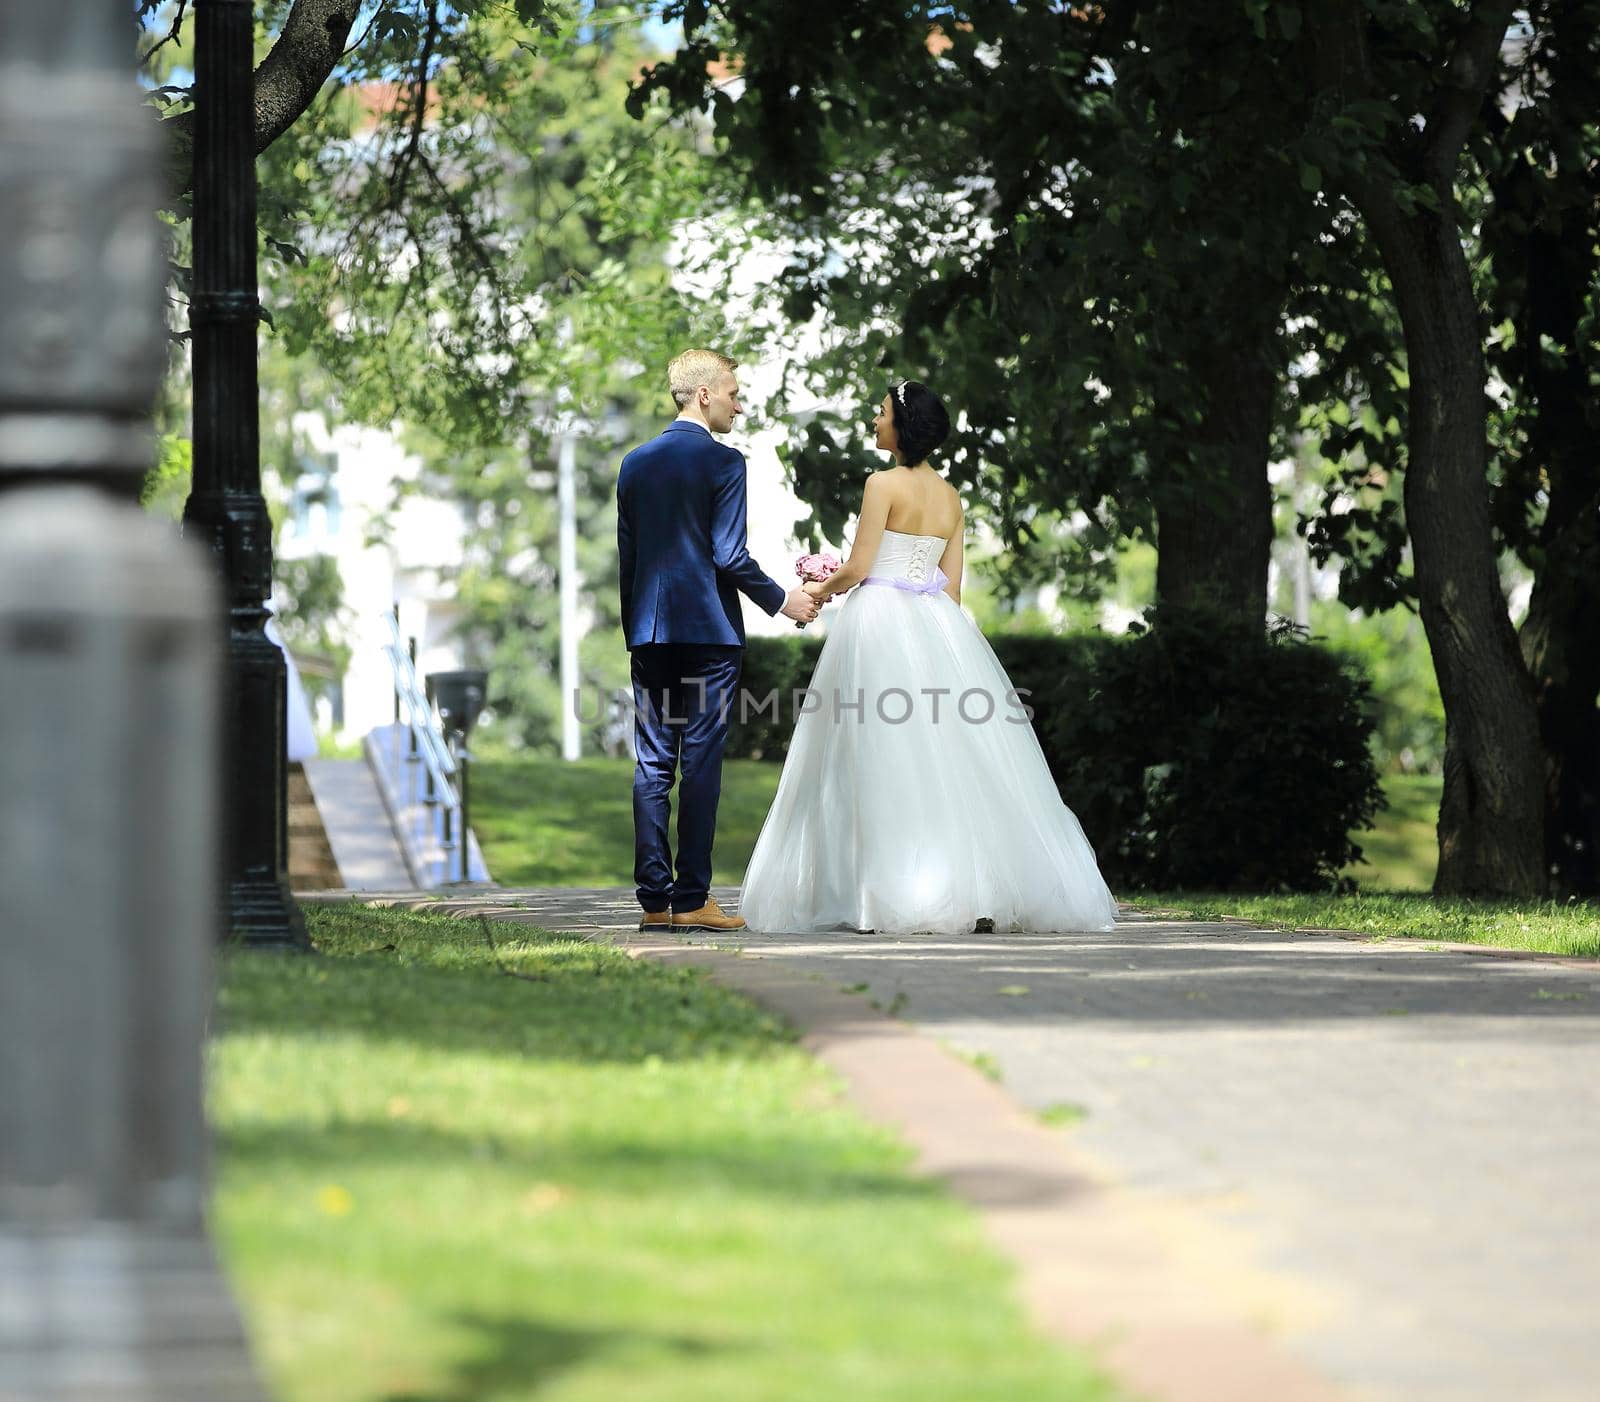 back groom and bride walking along the alley on the background of trees by SmartPhotoLab